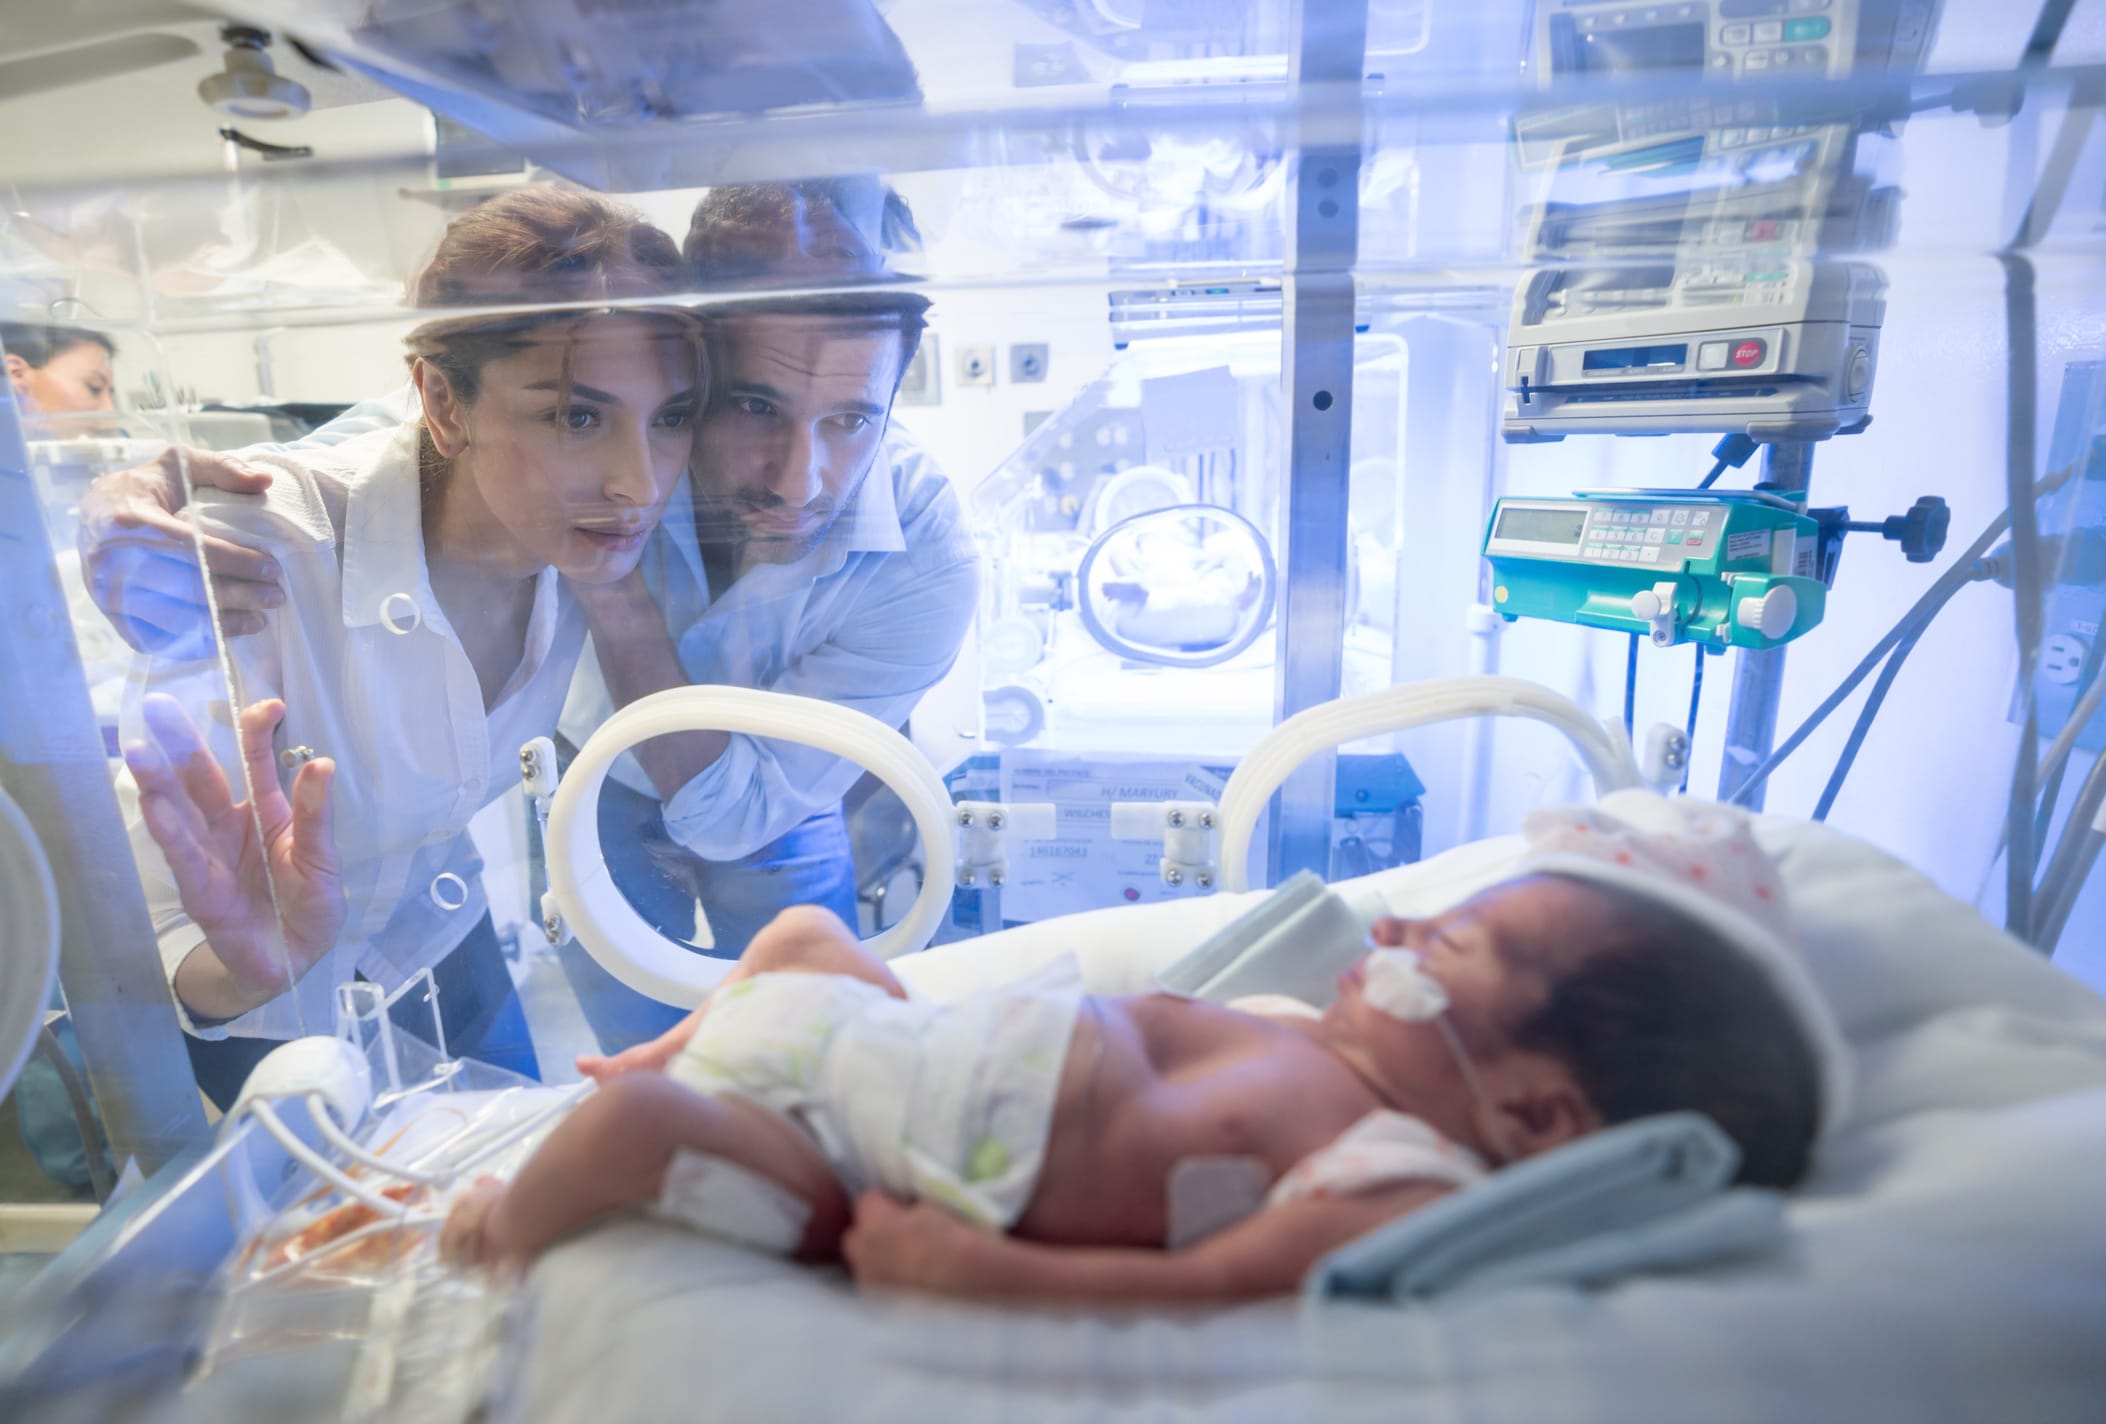 When Can Premature Babies Go Home?